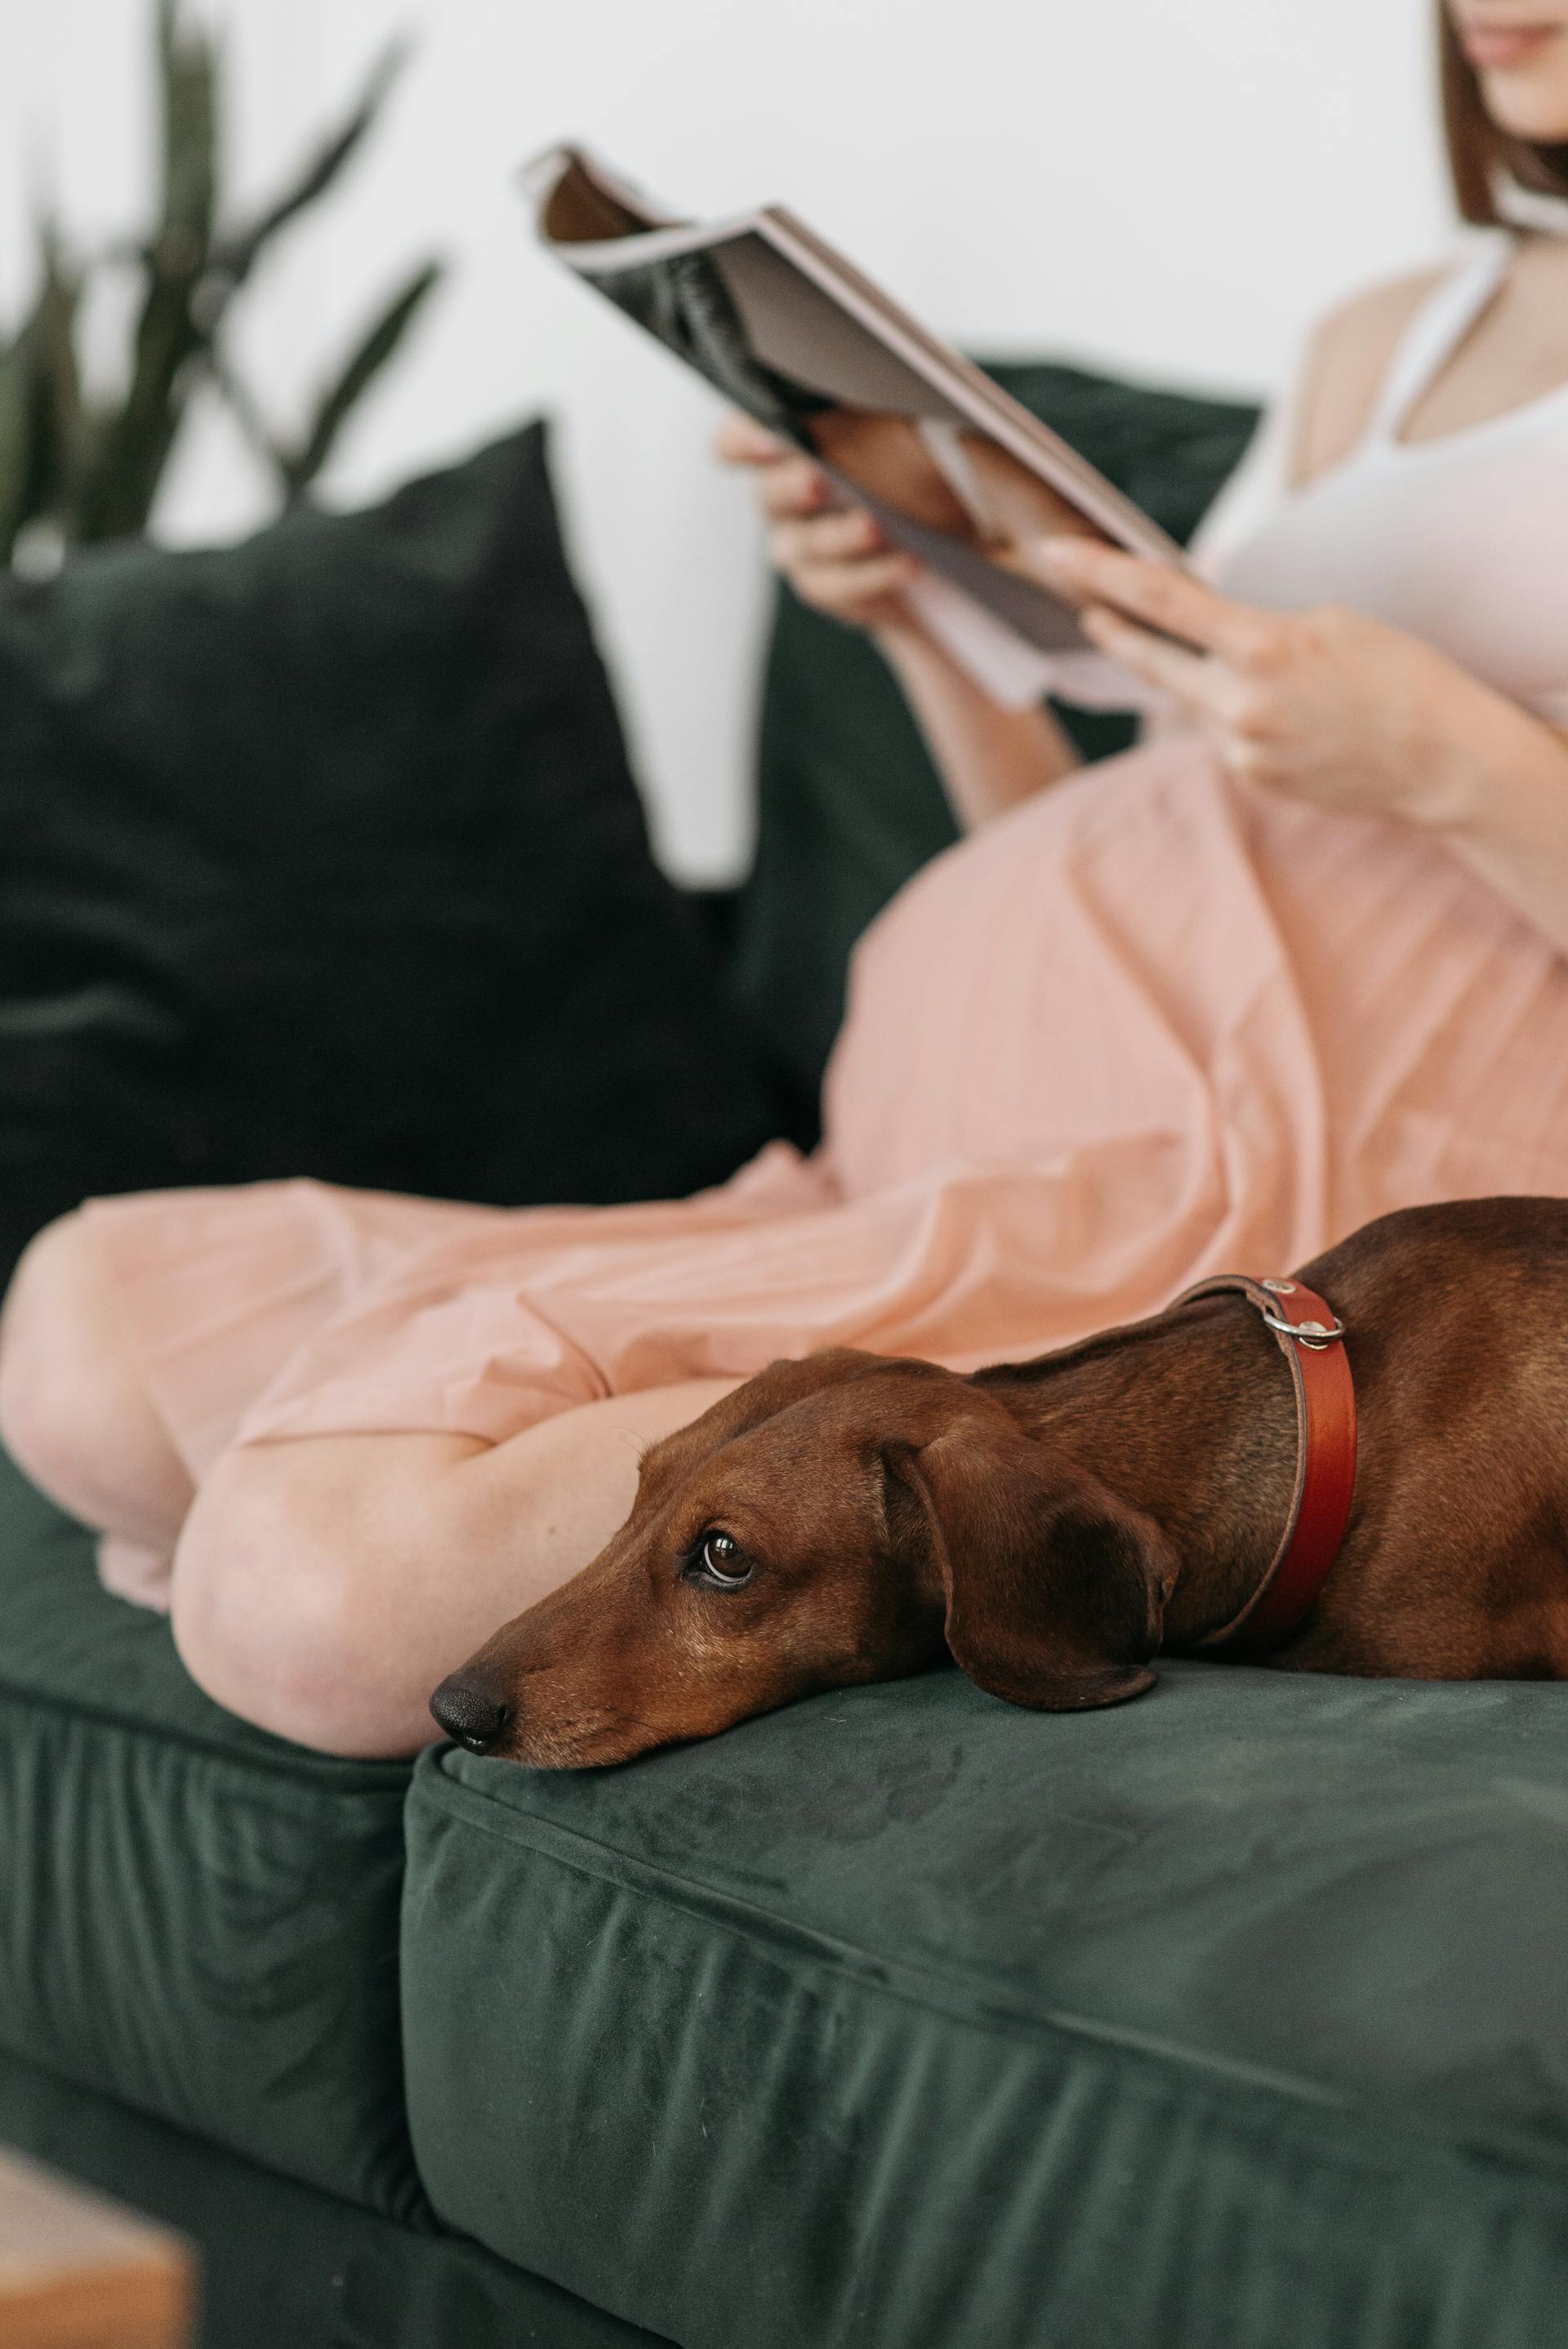 A pregnant woman sitting on a couch | Source: Pexels